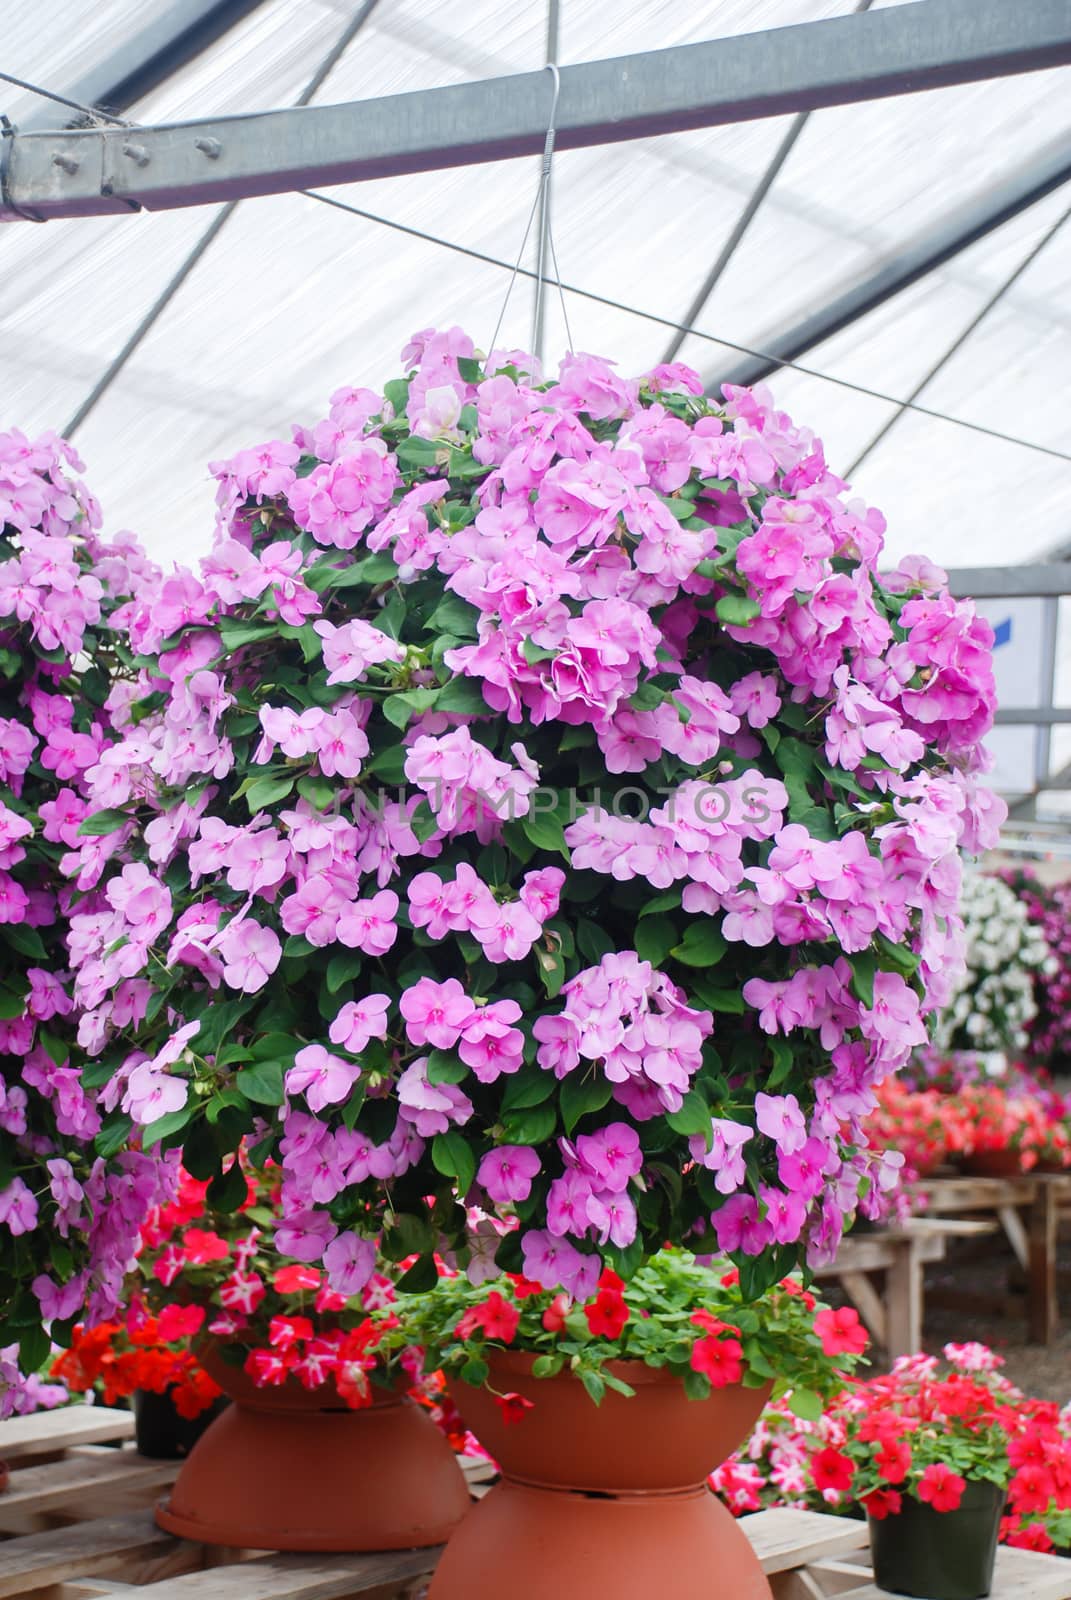 Pink impatiens in potted, scientific name Impatiens walleriana flowers also called Balsam, flower bed of blossoms in pink